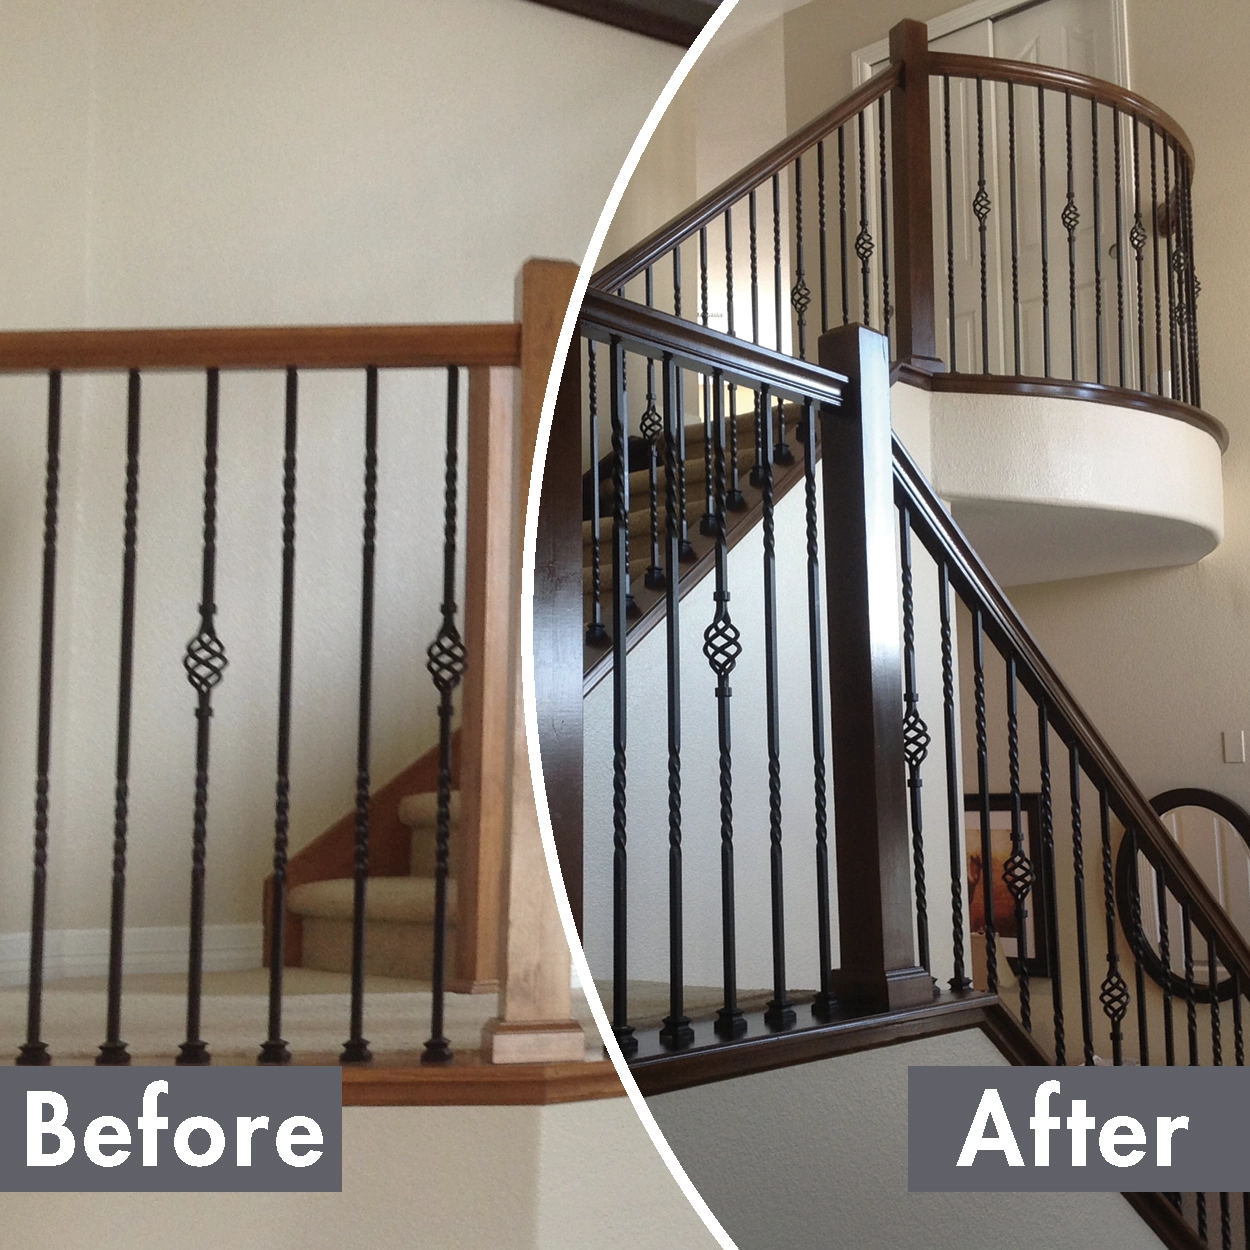 On the left, a photo of a staircase with a wooden handrail wooden handrail before N-Hance hardwood refinishing. On the right, a photo of the stair case where the wooden handrail has had N-Hance hardwood refinishing services.